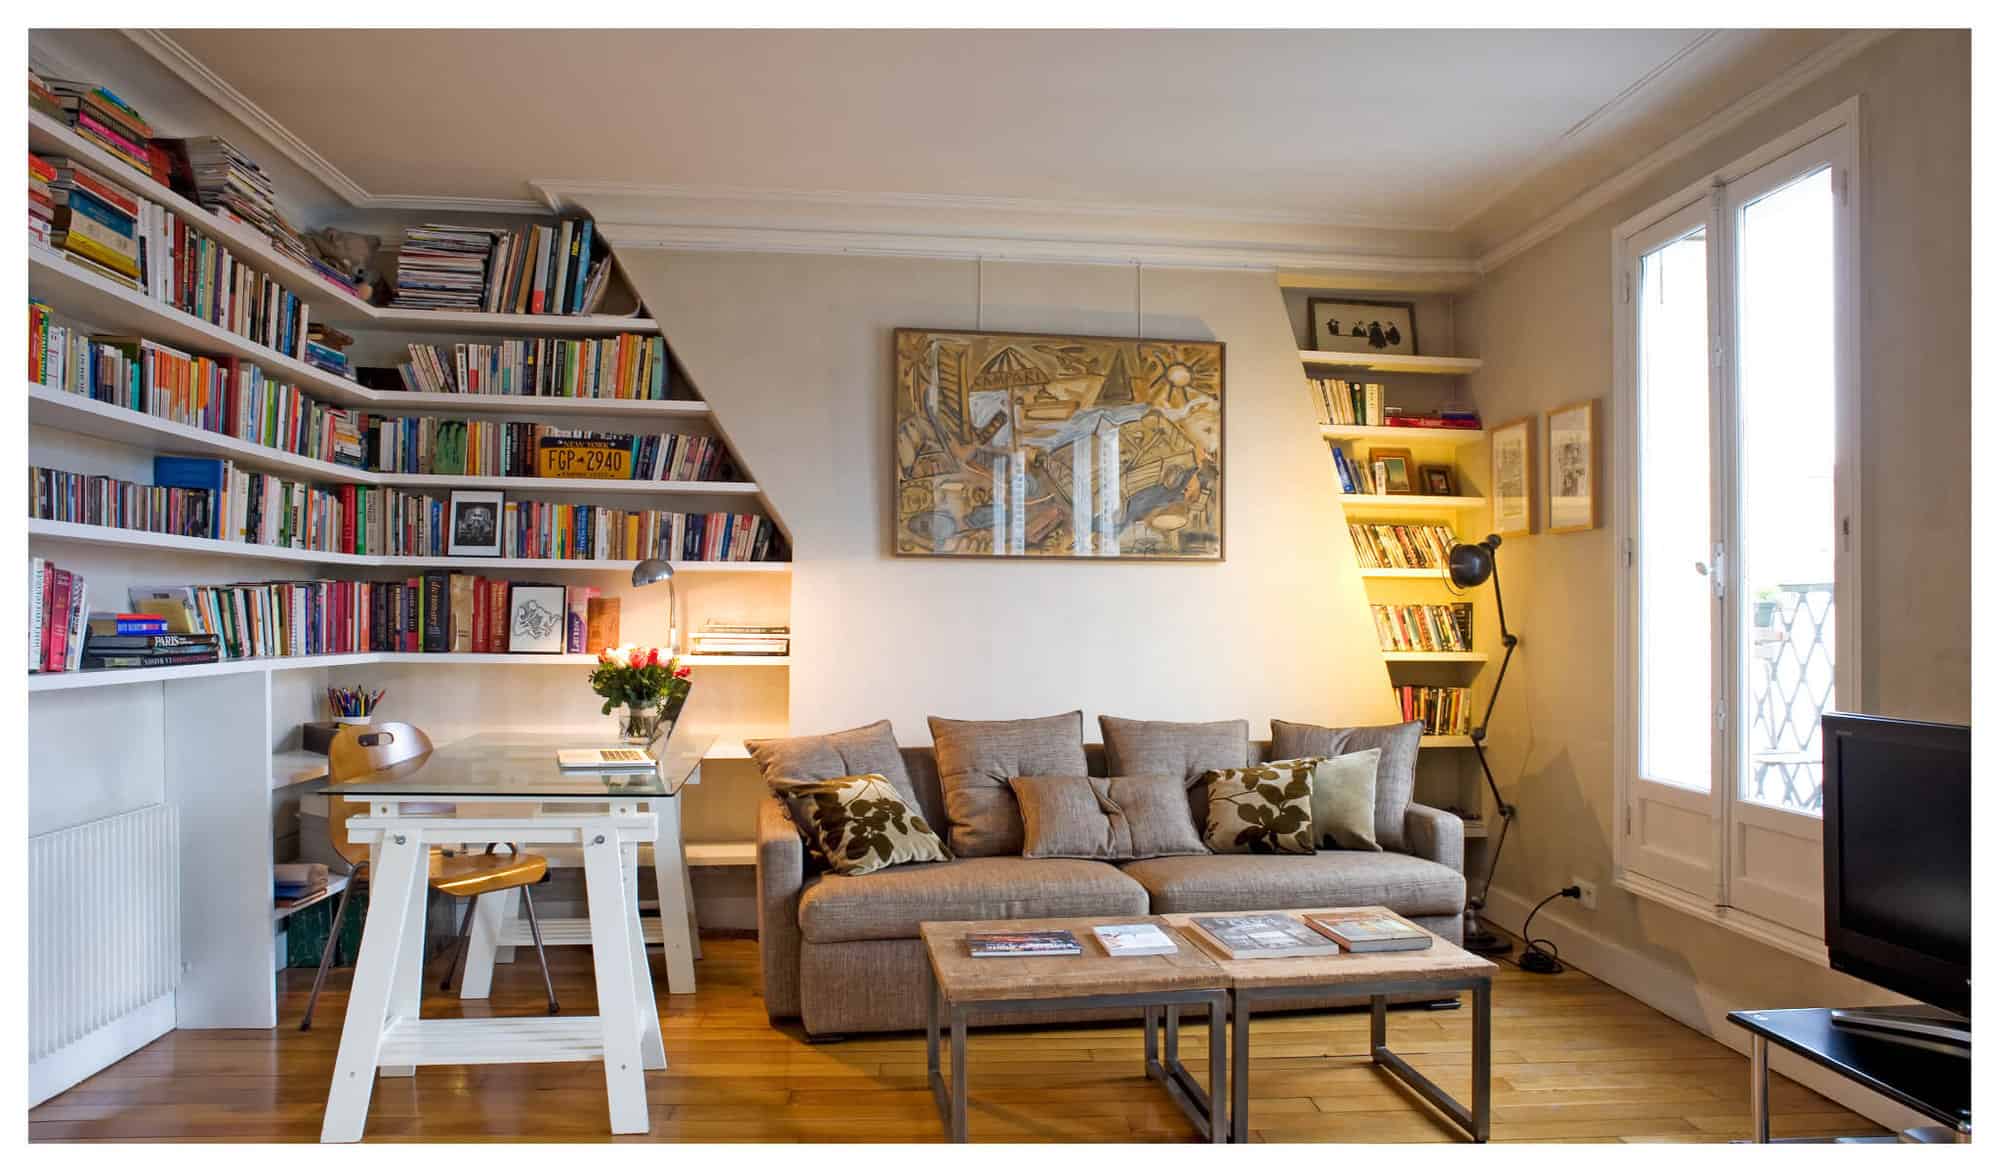 A large beige sofa and desk sit inside a Parisian salon that's filled with several bookshelves